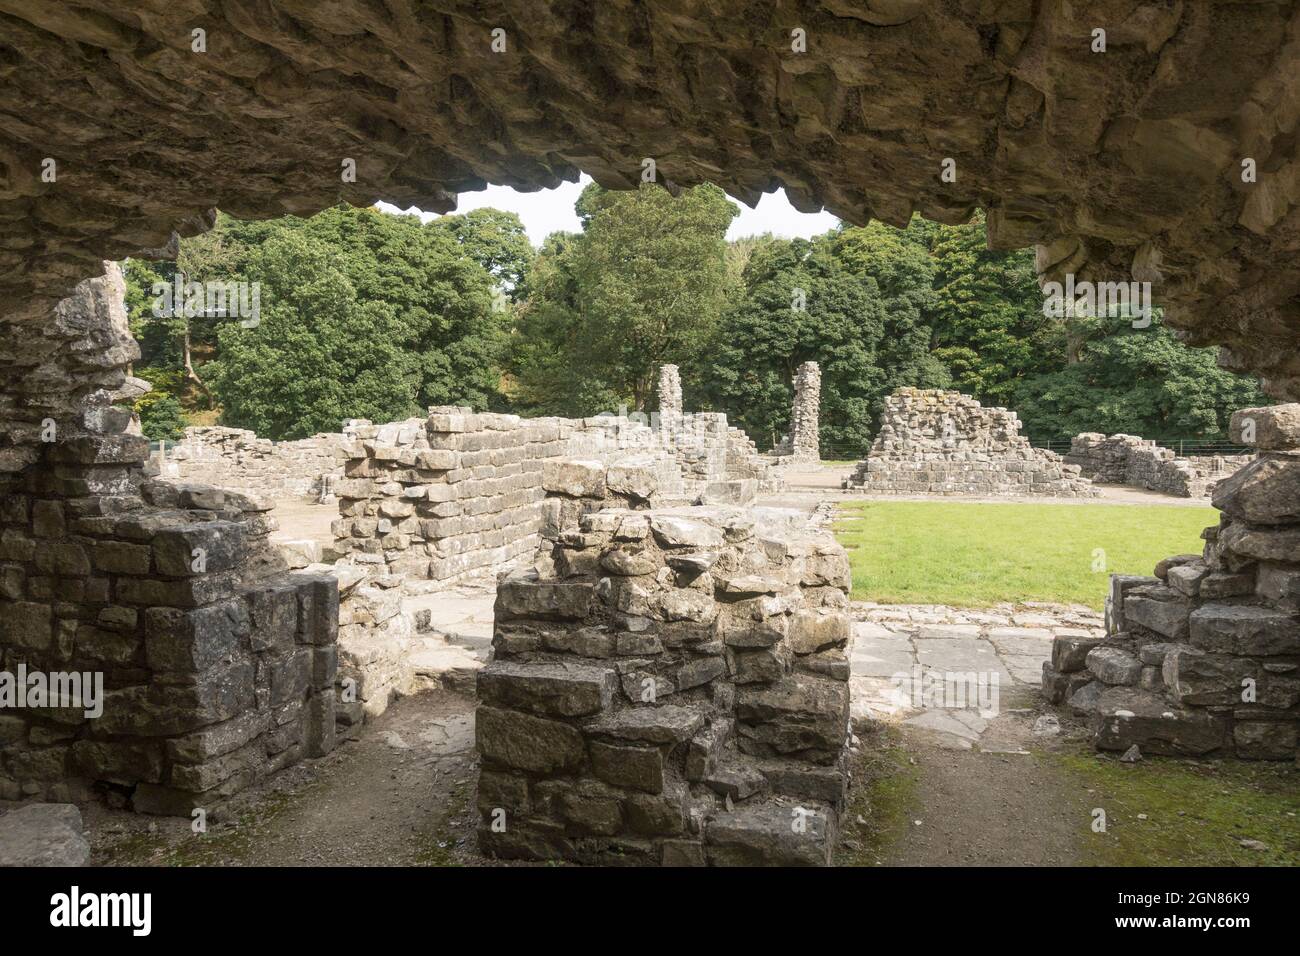 View from within  the cellars of the ruins of Shap Abbey of the Premonstratensian order of canons, Cumbria, England, UK Stock Photo